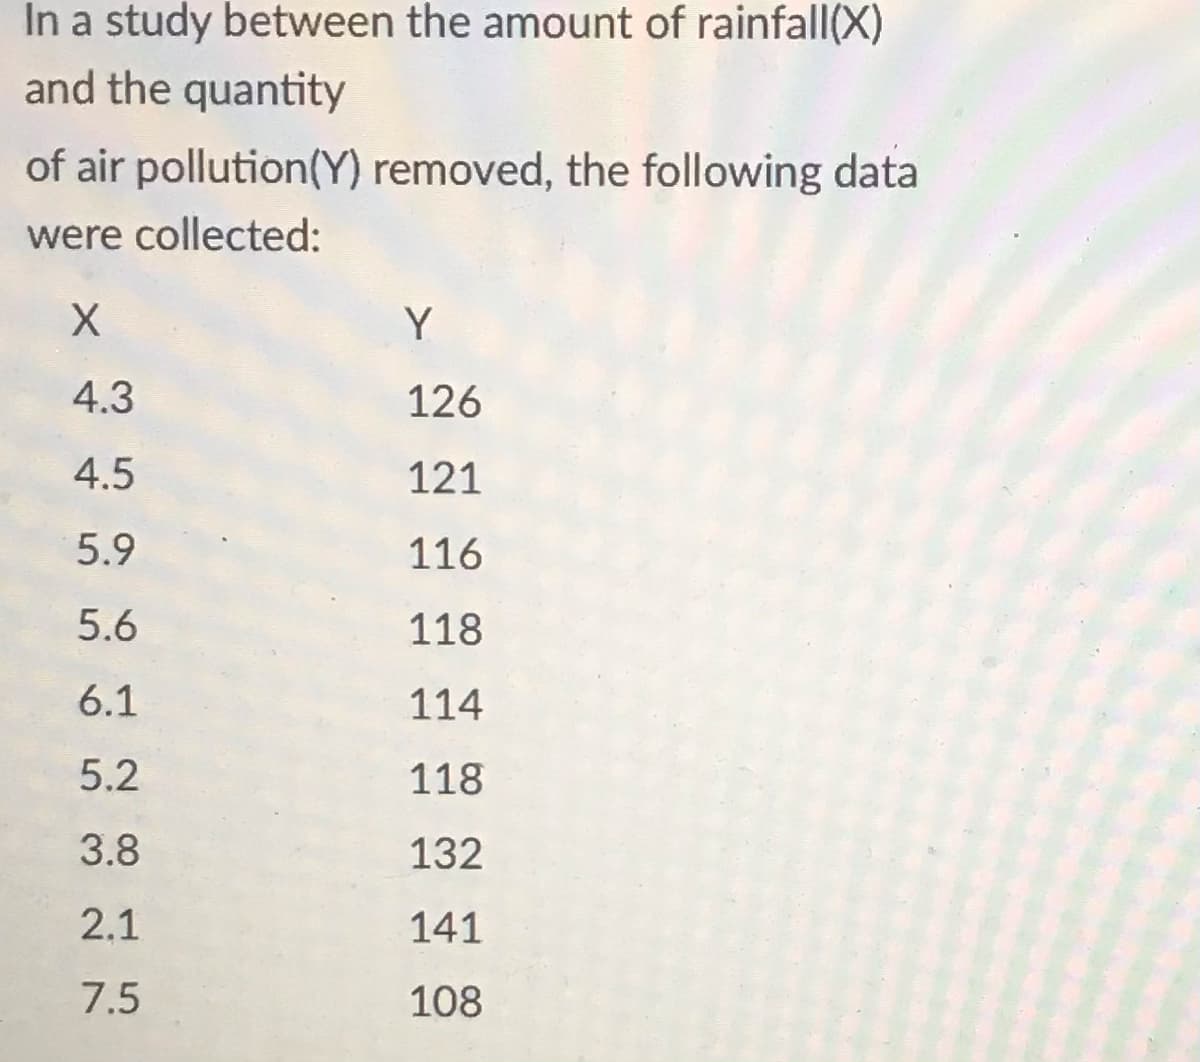 In a study between the amount of rainfall (X)
and the quantity
of air pollution (Y) removed, the following data
were collected:
X
4.3
4.5
5.9
5.6
6.1
5.2
3.8
2.1
7.5
Y
126
121
116
118
114
118
132
141
108